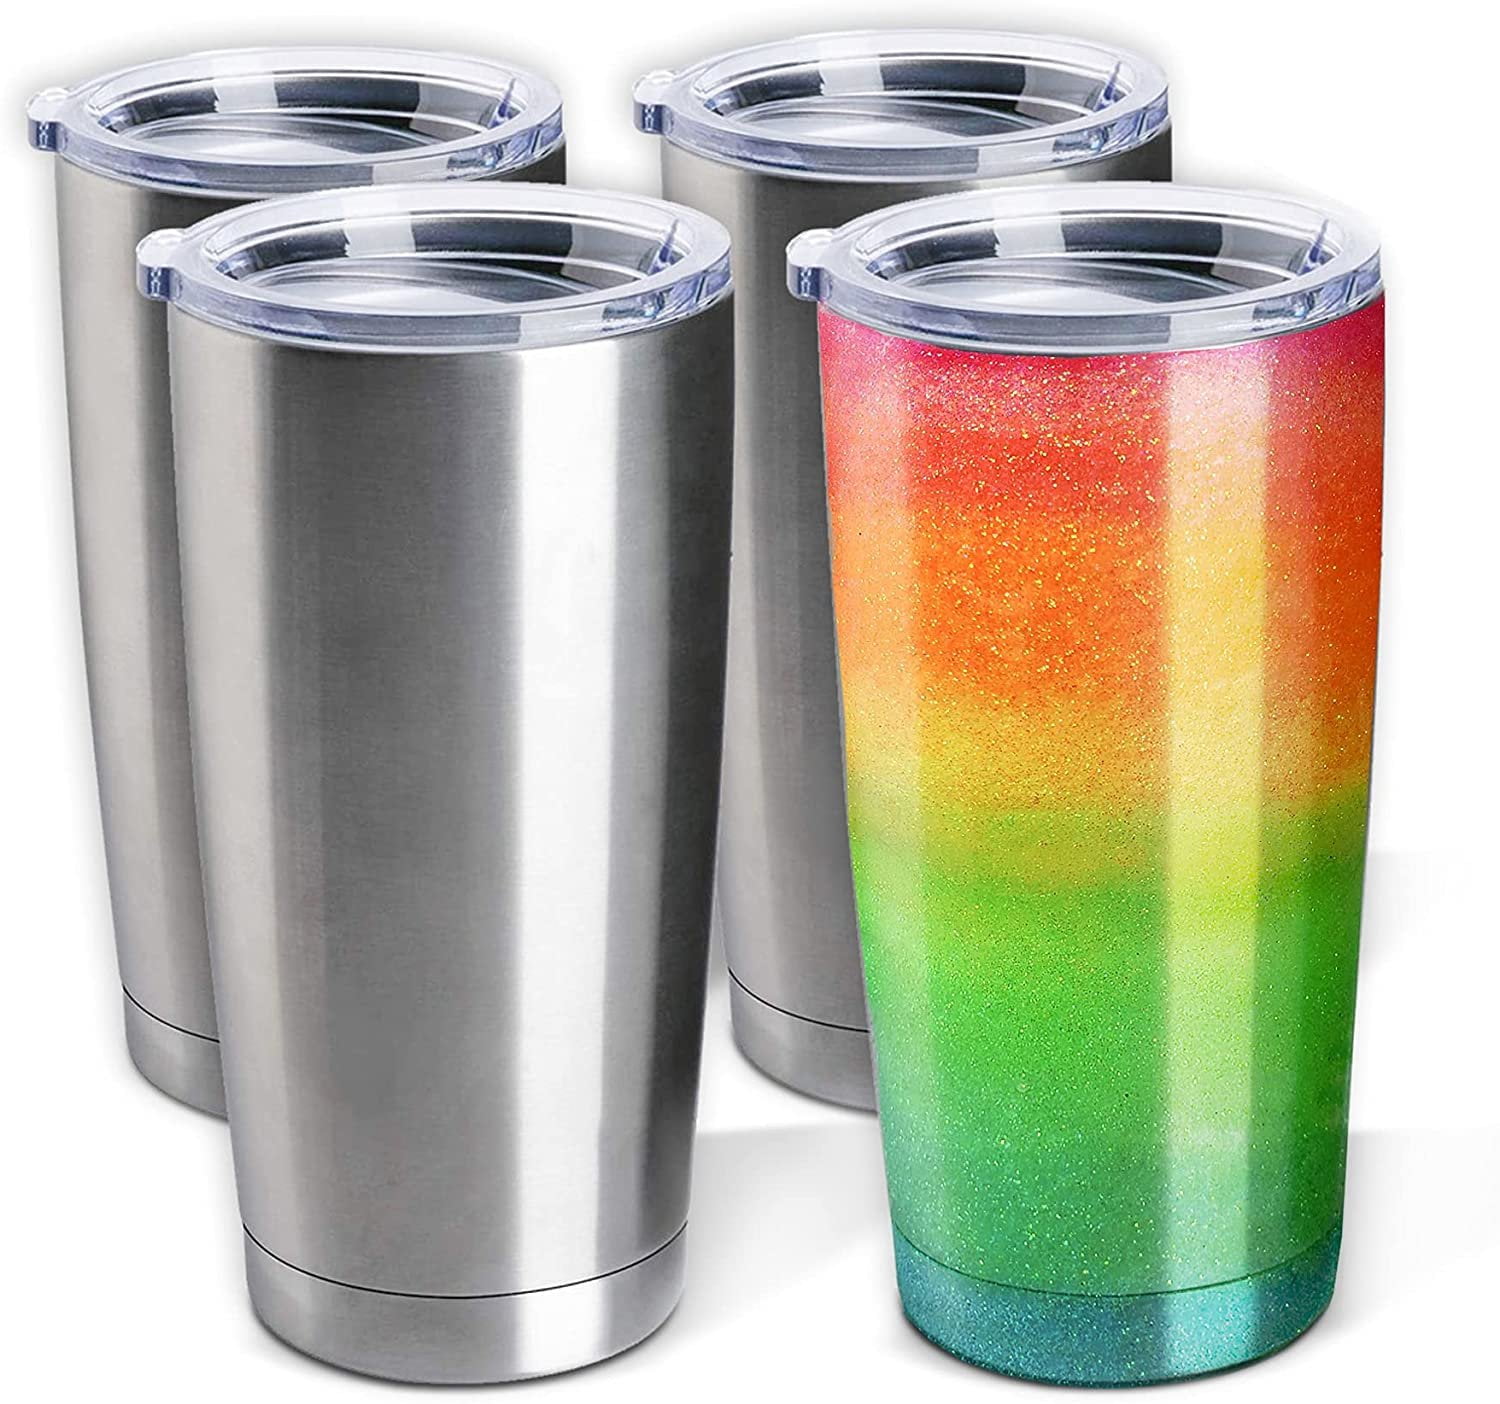 WF3114BA 14-oz. Stainless Steel Insulated Tumblers with Lids, 4